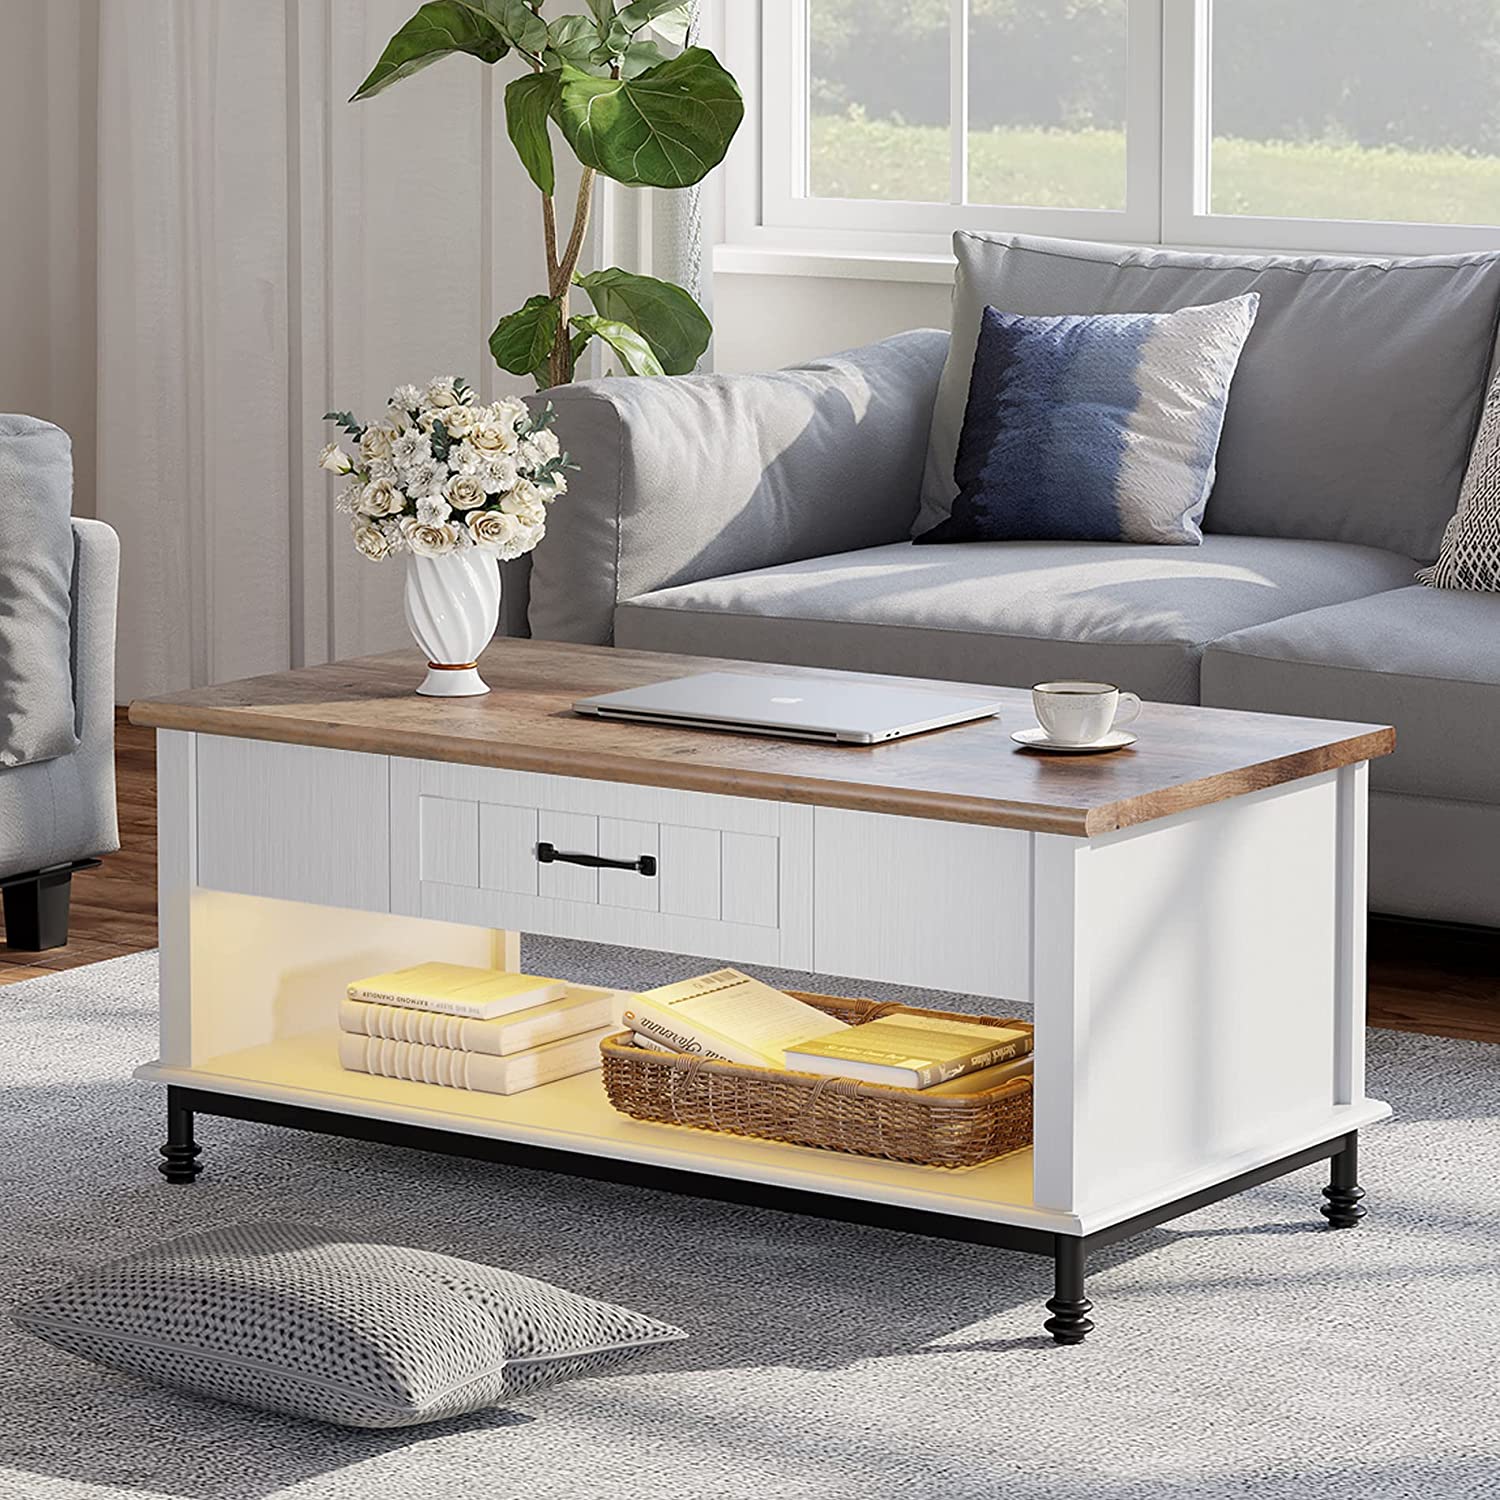 WAMPAT 42" Farmhouse Coffee Table with 1 Drawer & Open Storage Shelf for Living Room, Yellow LED Light, White